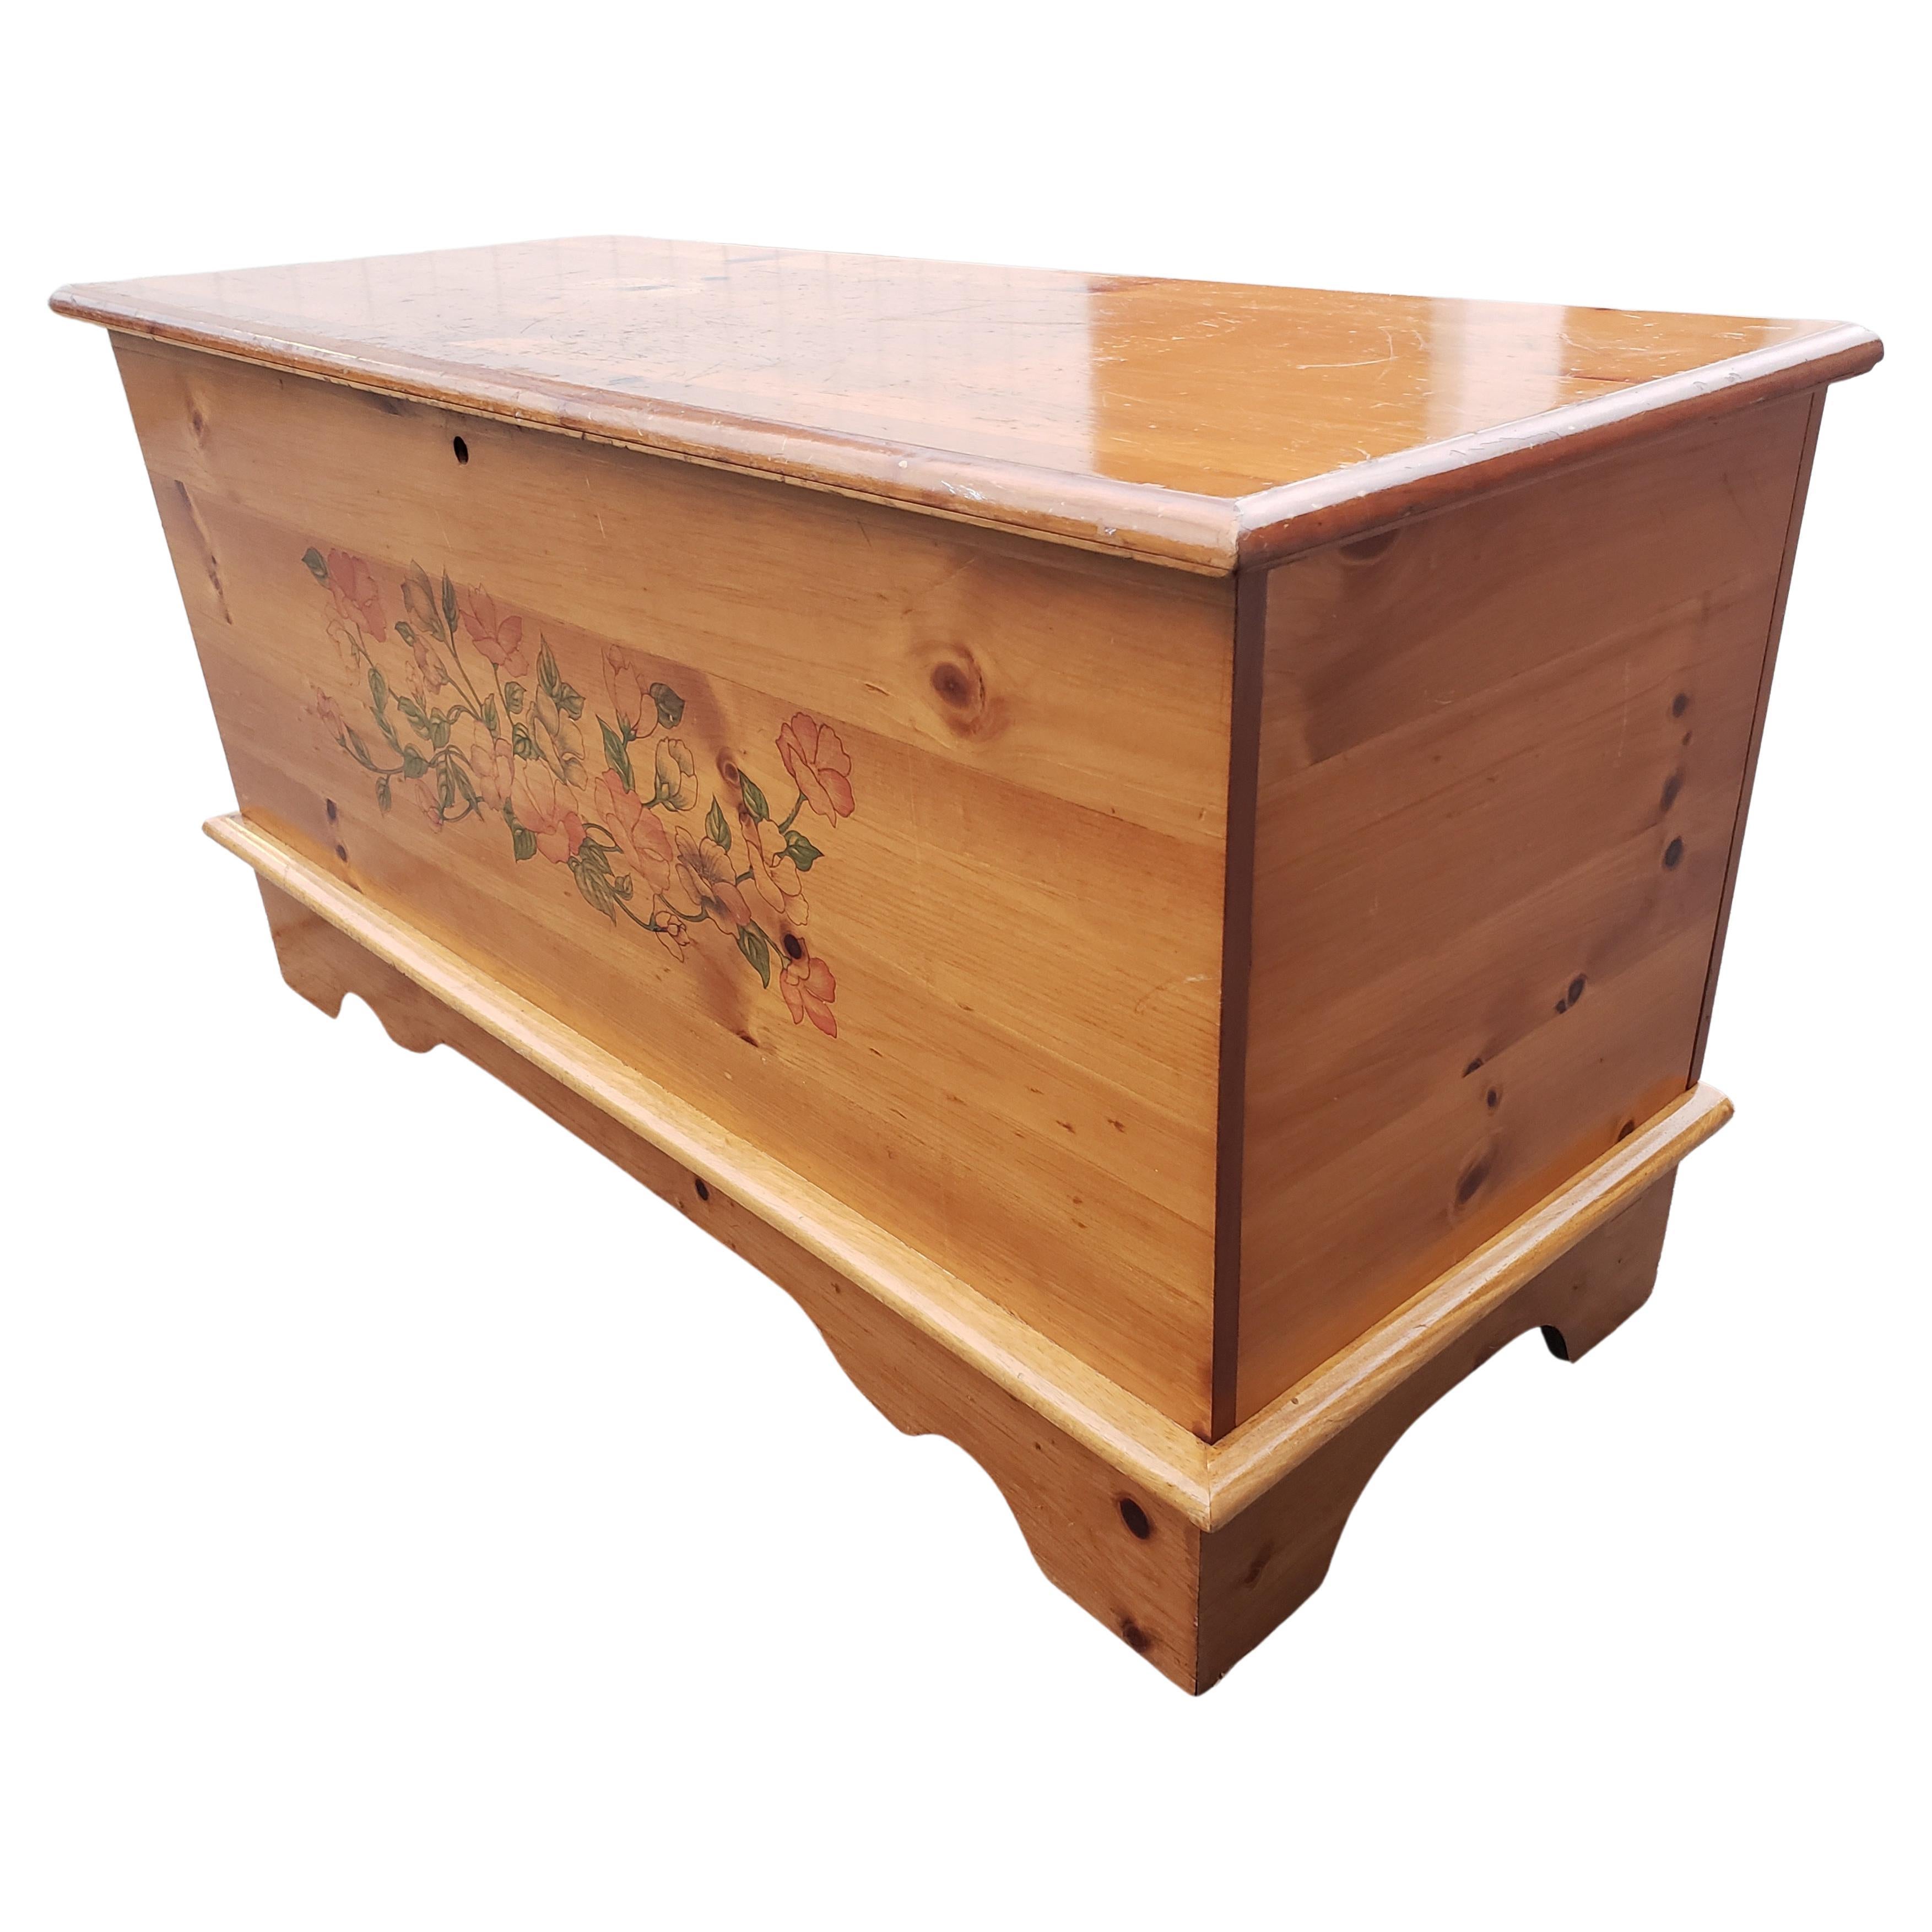 This brilliant Cedar Trunk chest is made of cedar wood, pine cedar, and is in good vintage condition. This exquisite cedar chest has great Traditional style with a classic silhouette, interesting features such as beautiful flower hand painting in